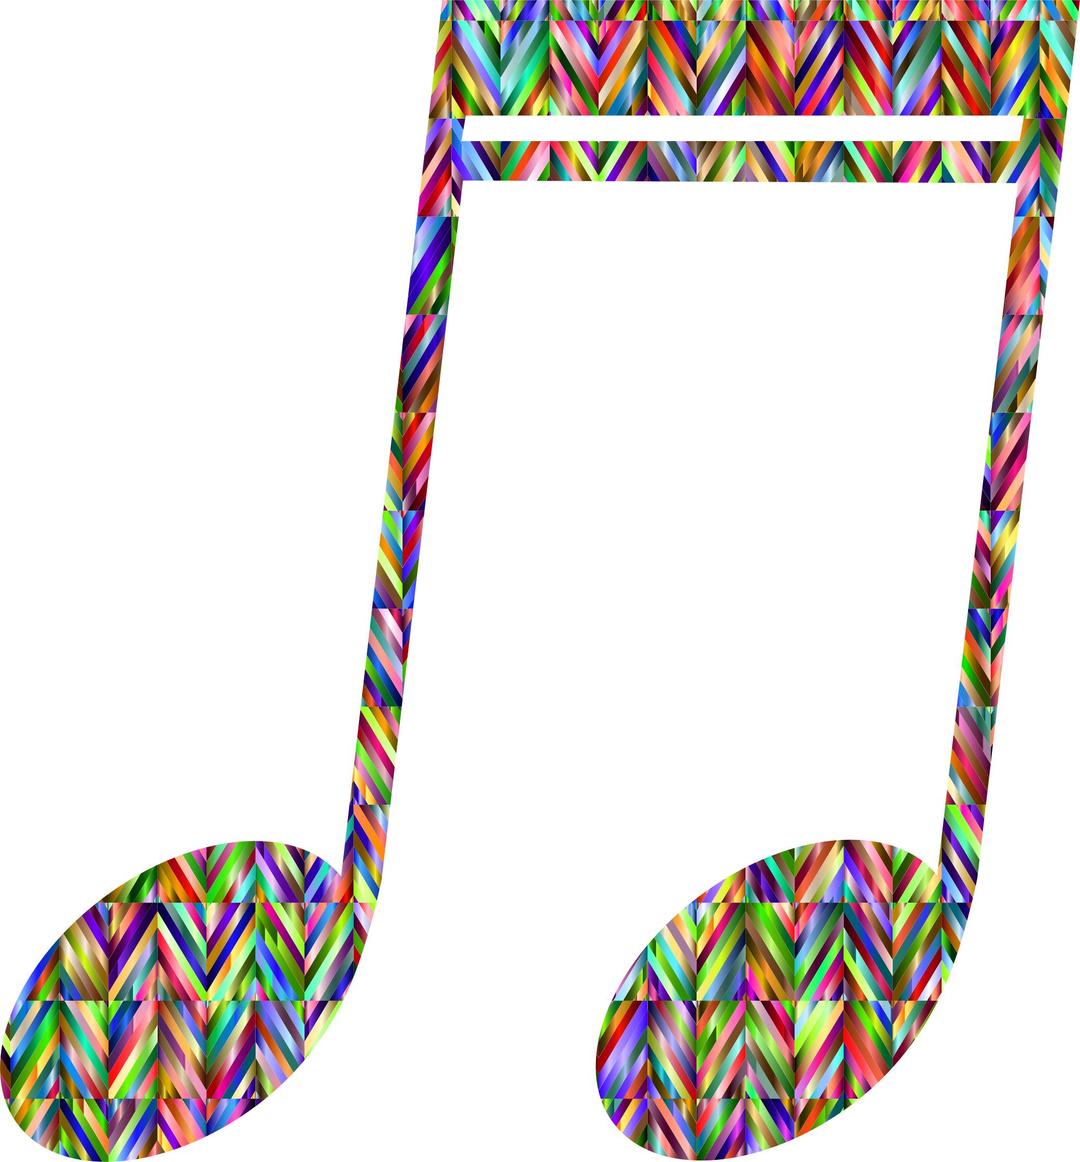 Prismatic Strips Musical Note png transparent